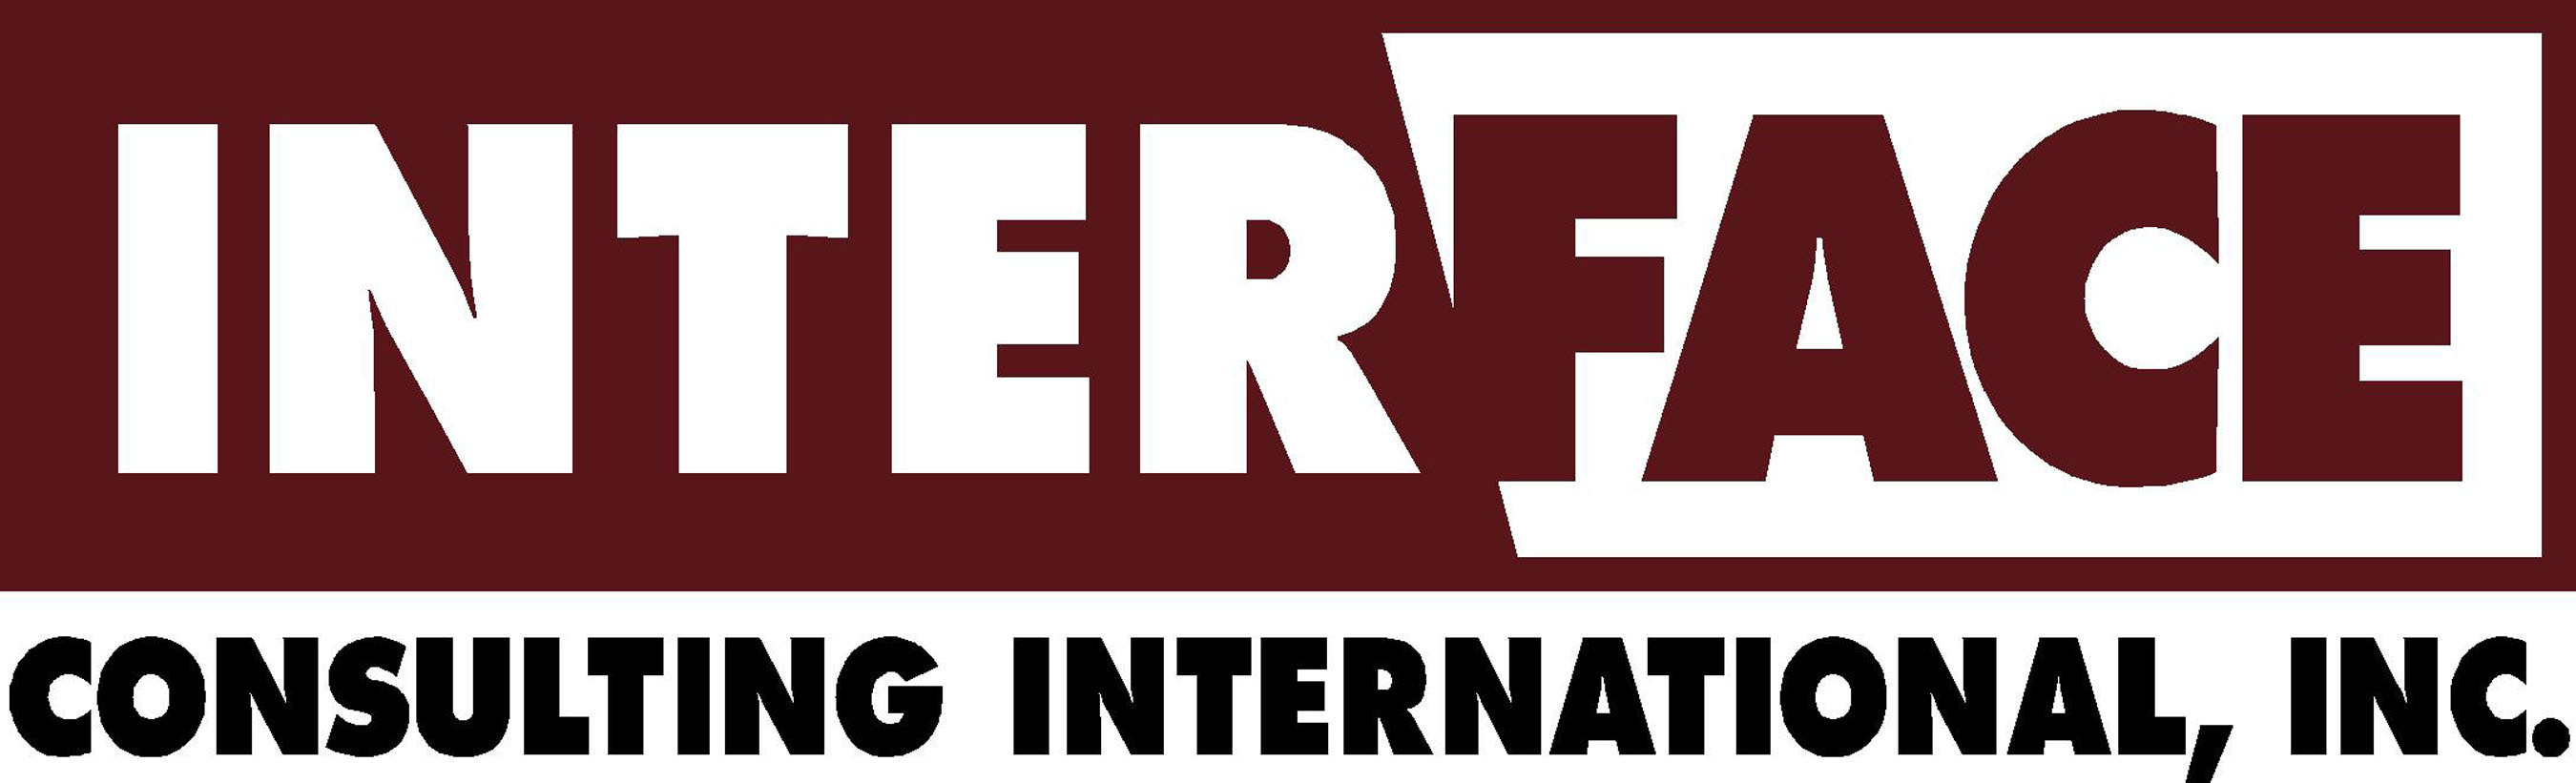 InterFace Consulting International's Logo. (PRNewsFoto/Interface Consulting International, Inc.) (PRNewsFoto/)